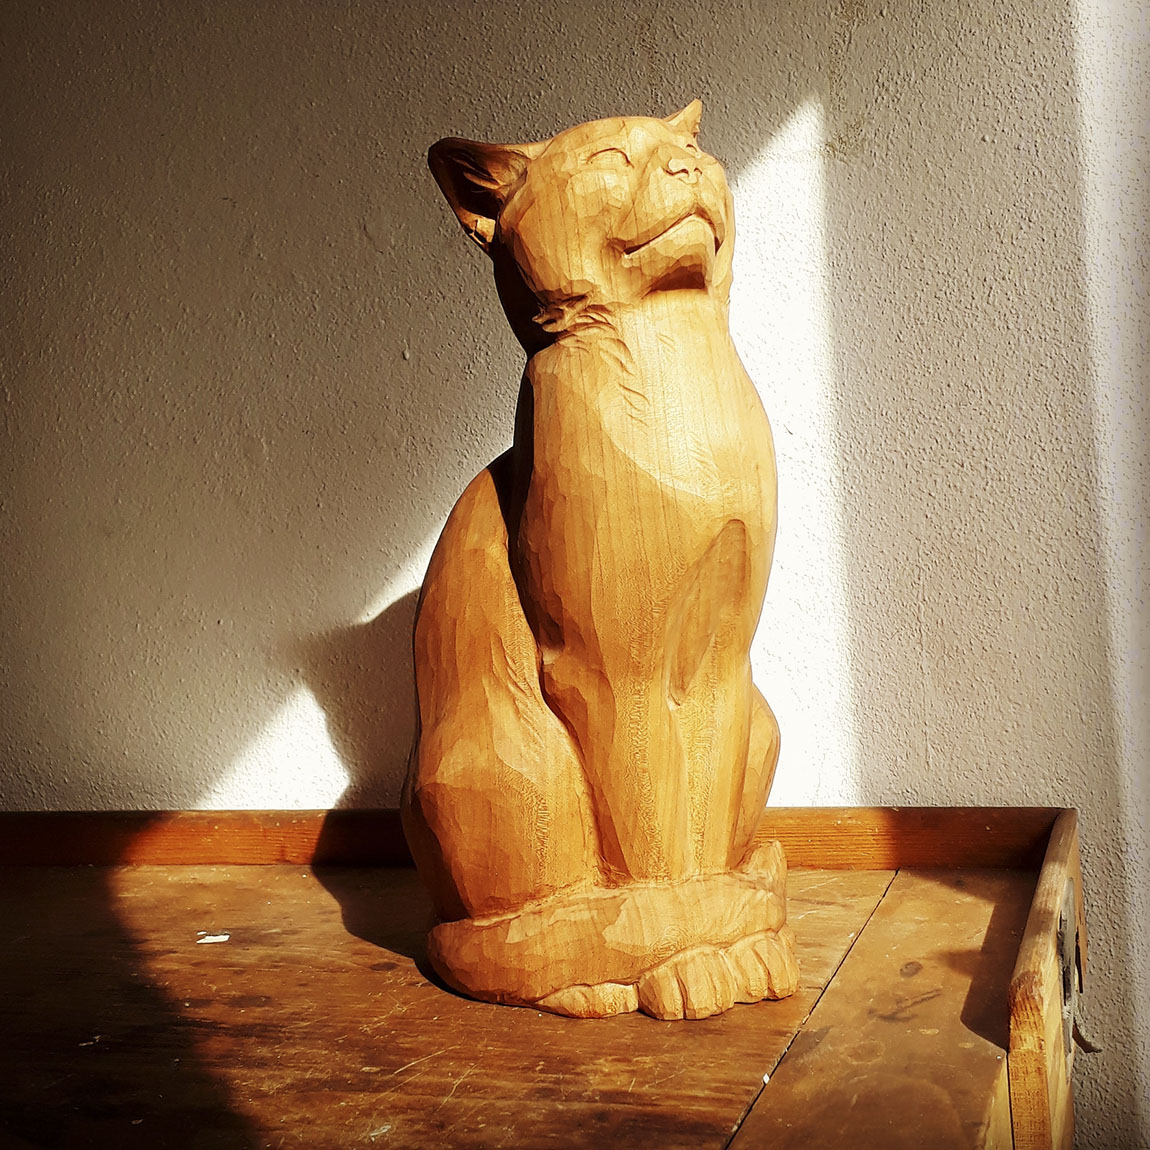 Huggler Holzbildhauerei: SWISS WOOD CARVING BETWEEN TRADITION AND FUTURE